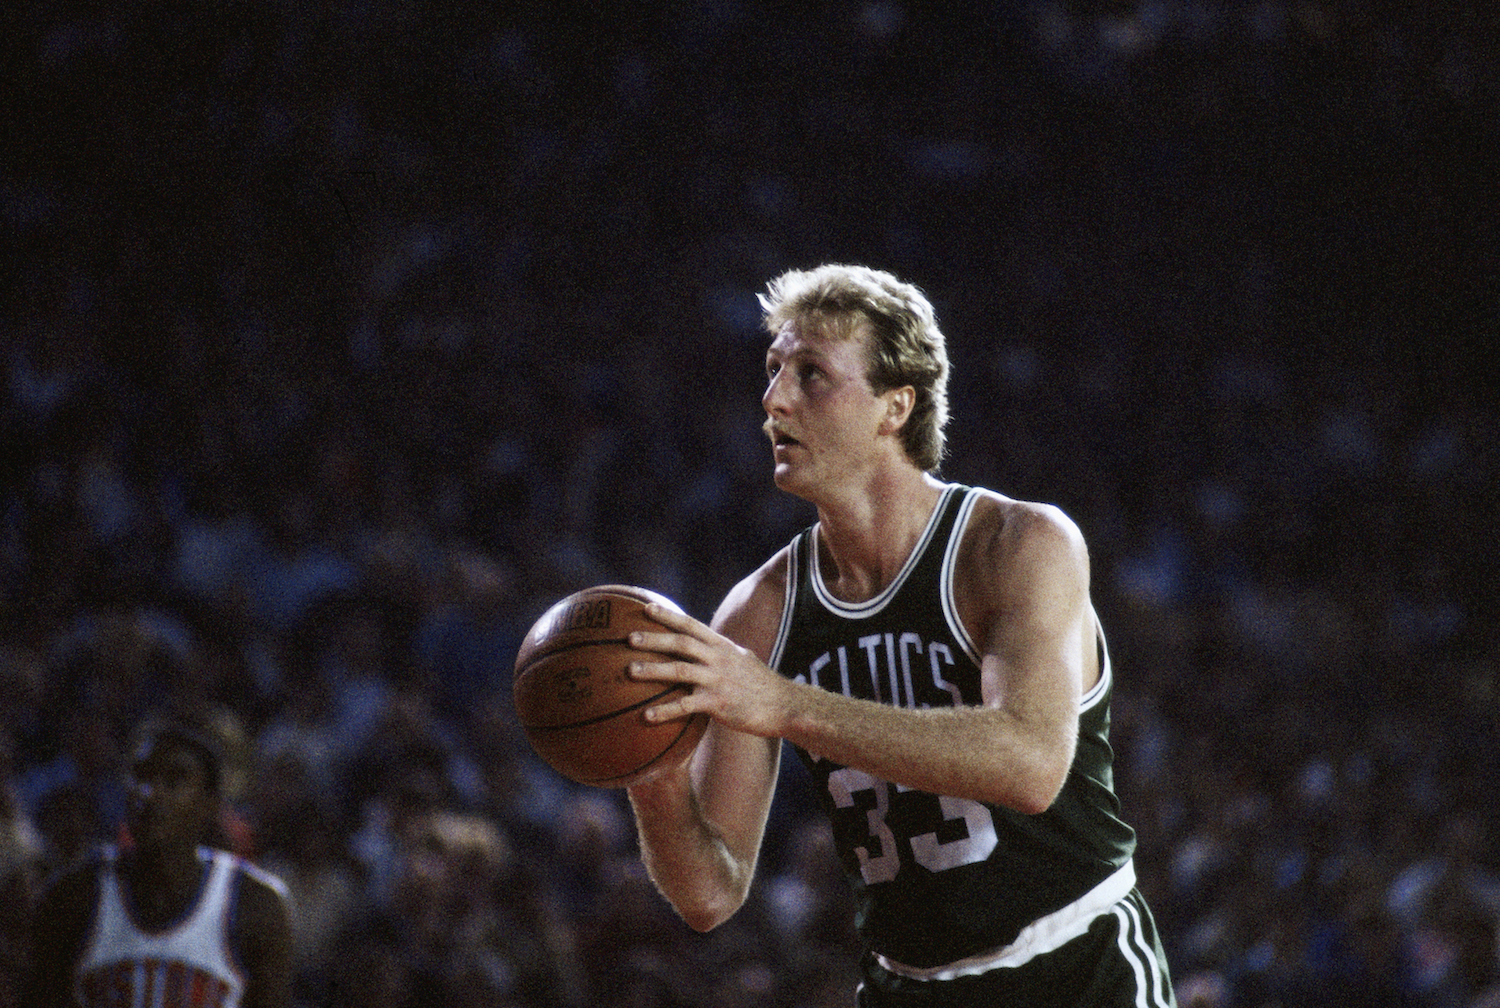 While Larry Bird had an iconic NBA career, he didn't think about basketball once he stepped on the court.